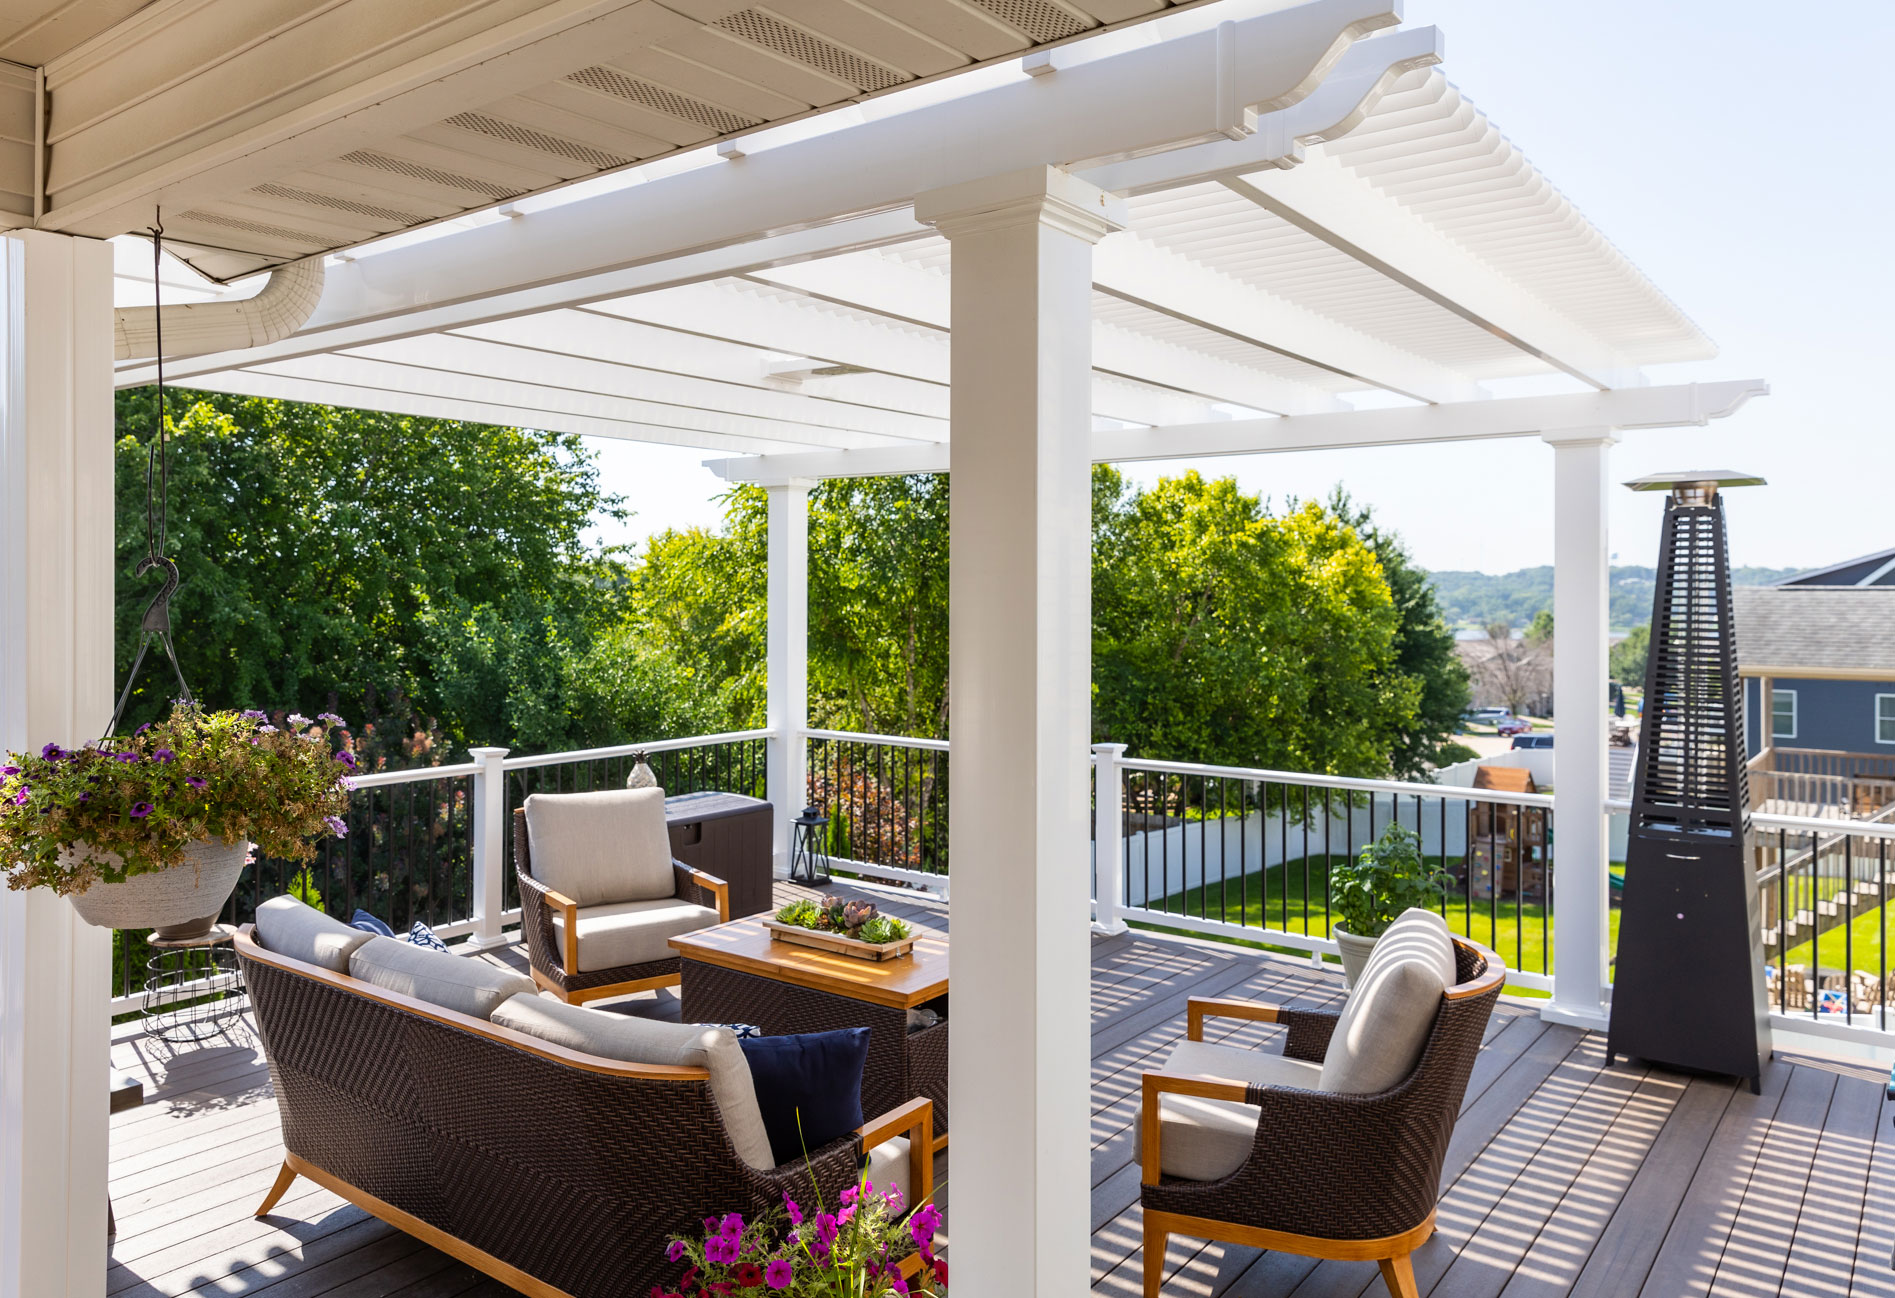 Comfy outdoor furniture on a deck under a large white pergola